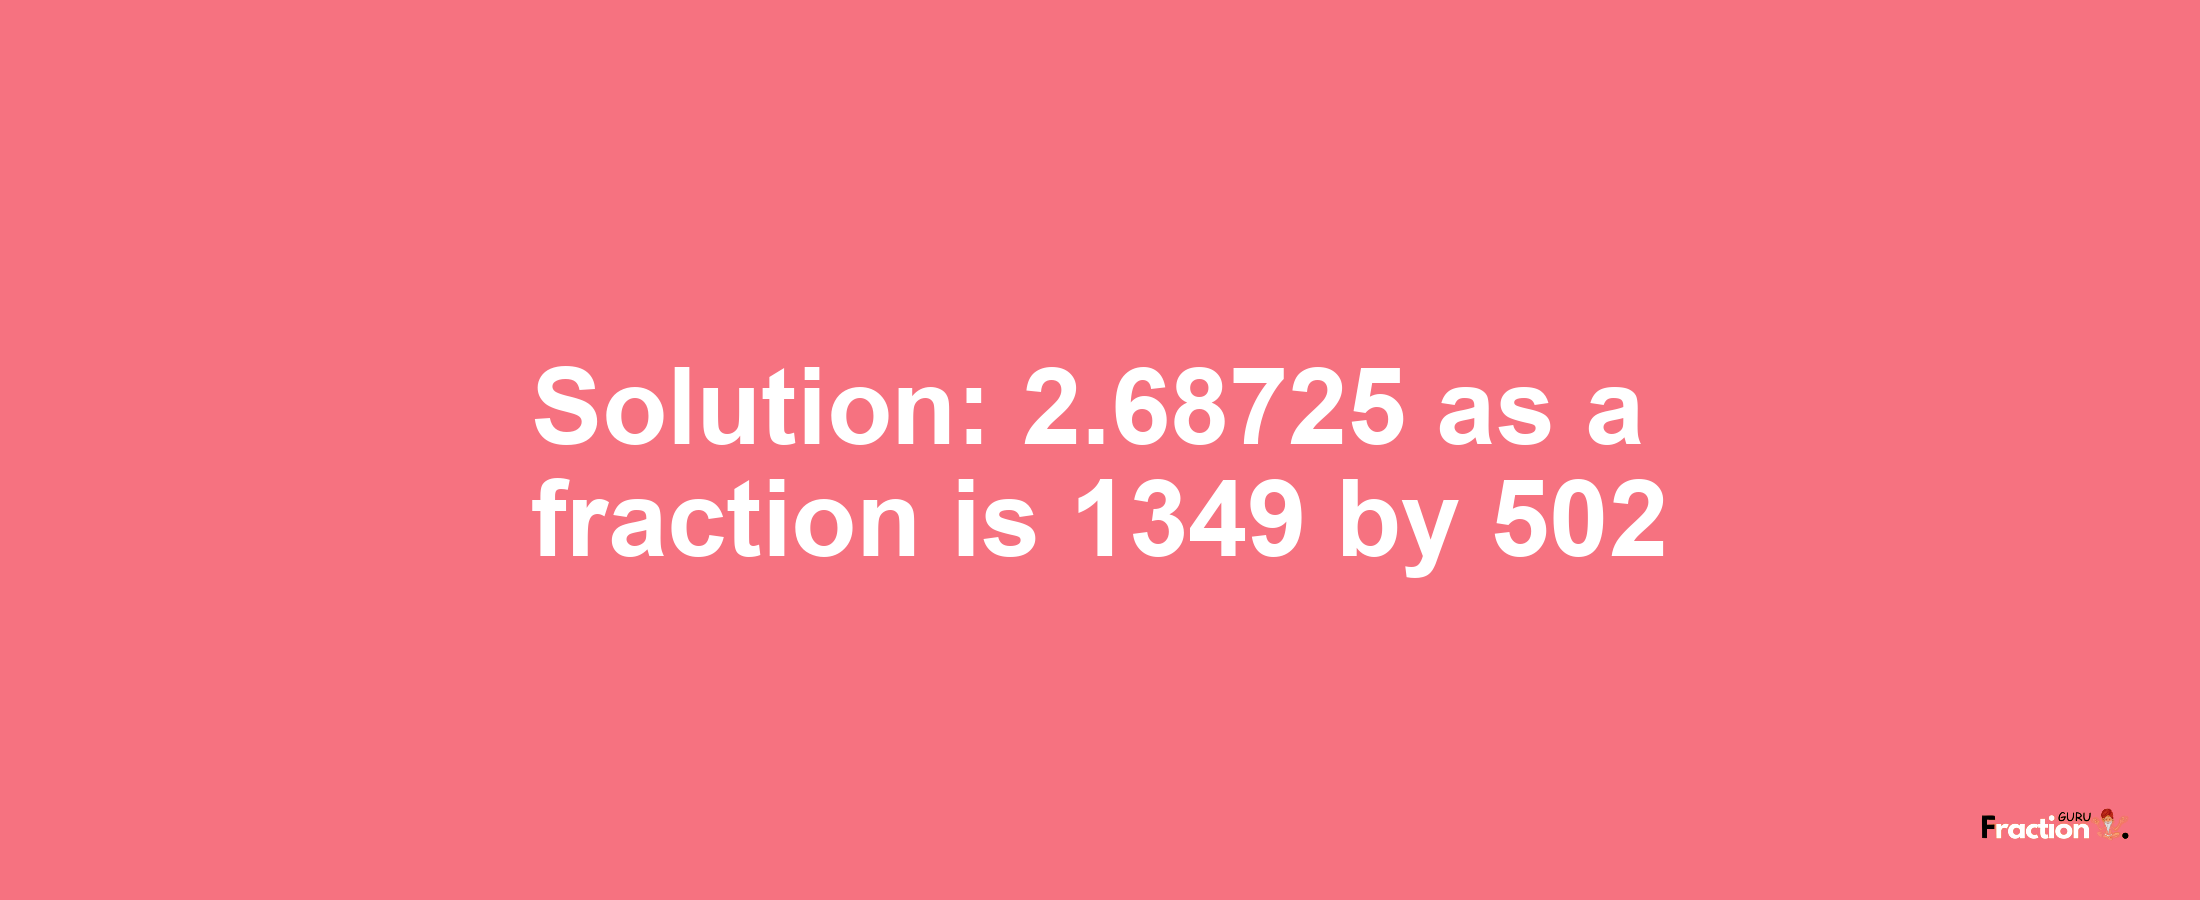 Solution:2.68725 as a fraction is 1349/502